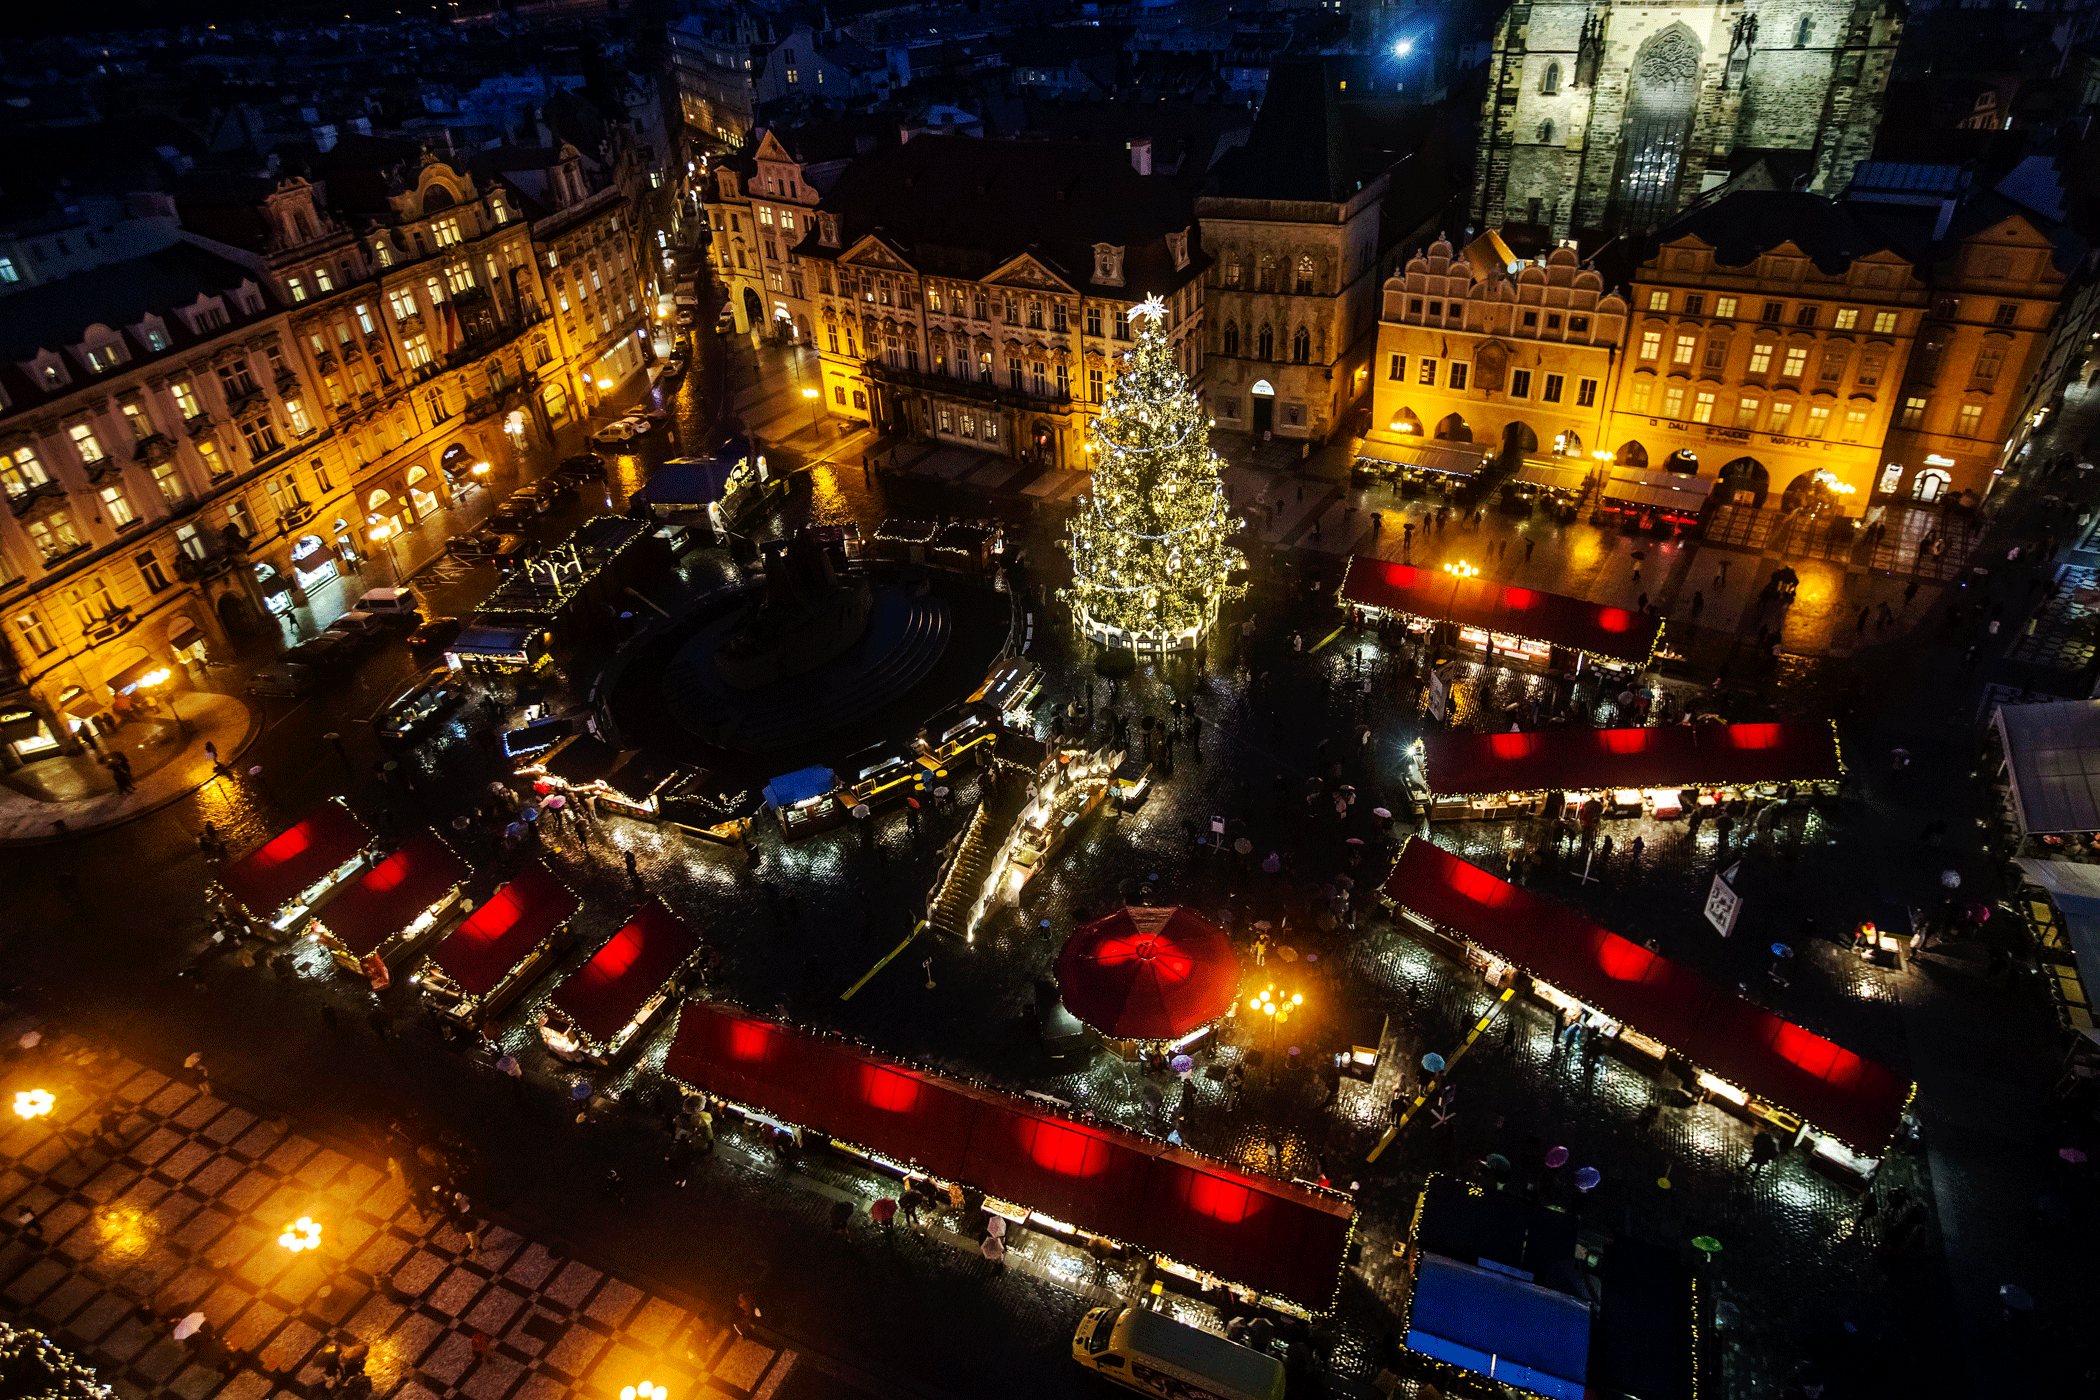 The Old Town Square and Christmas tree are illuminated at the Christmas market in Prague on Nov. 30, 2015.